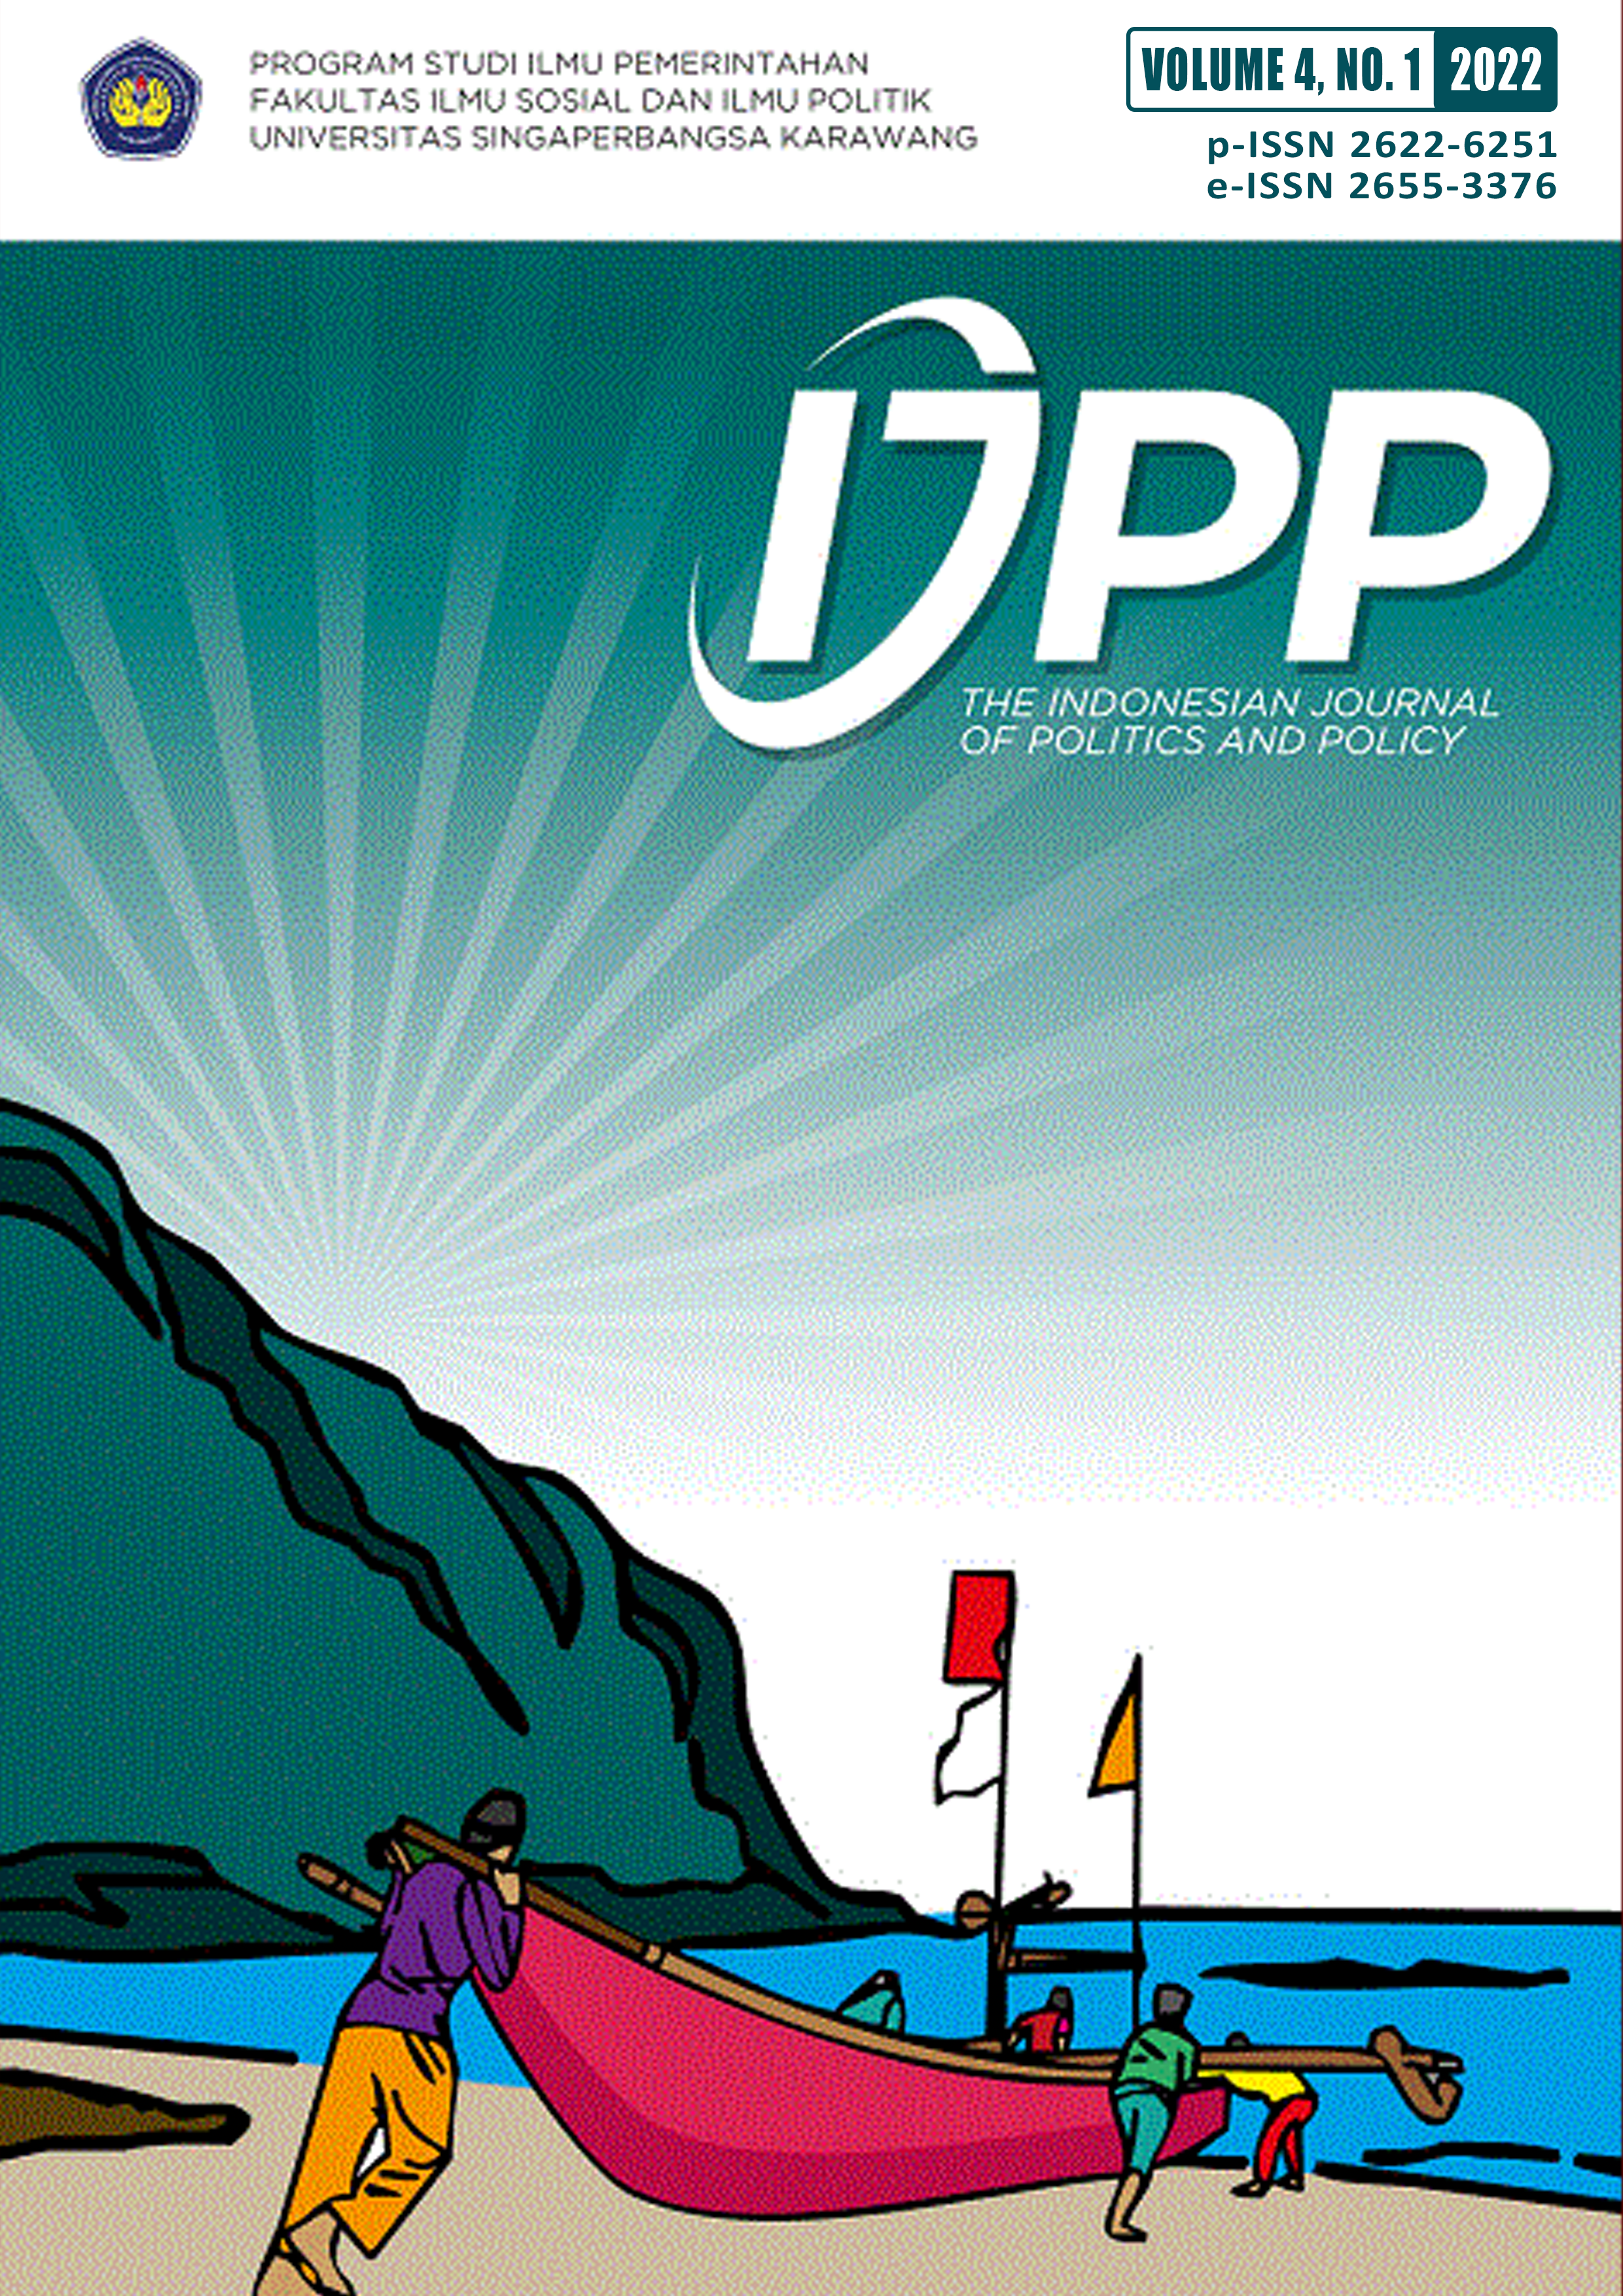 					View Vol. 4 No. 1 (2022):  THE INDONESIAN JOURNAL OF POLITICS AND POLICY
				